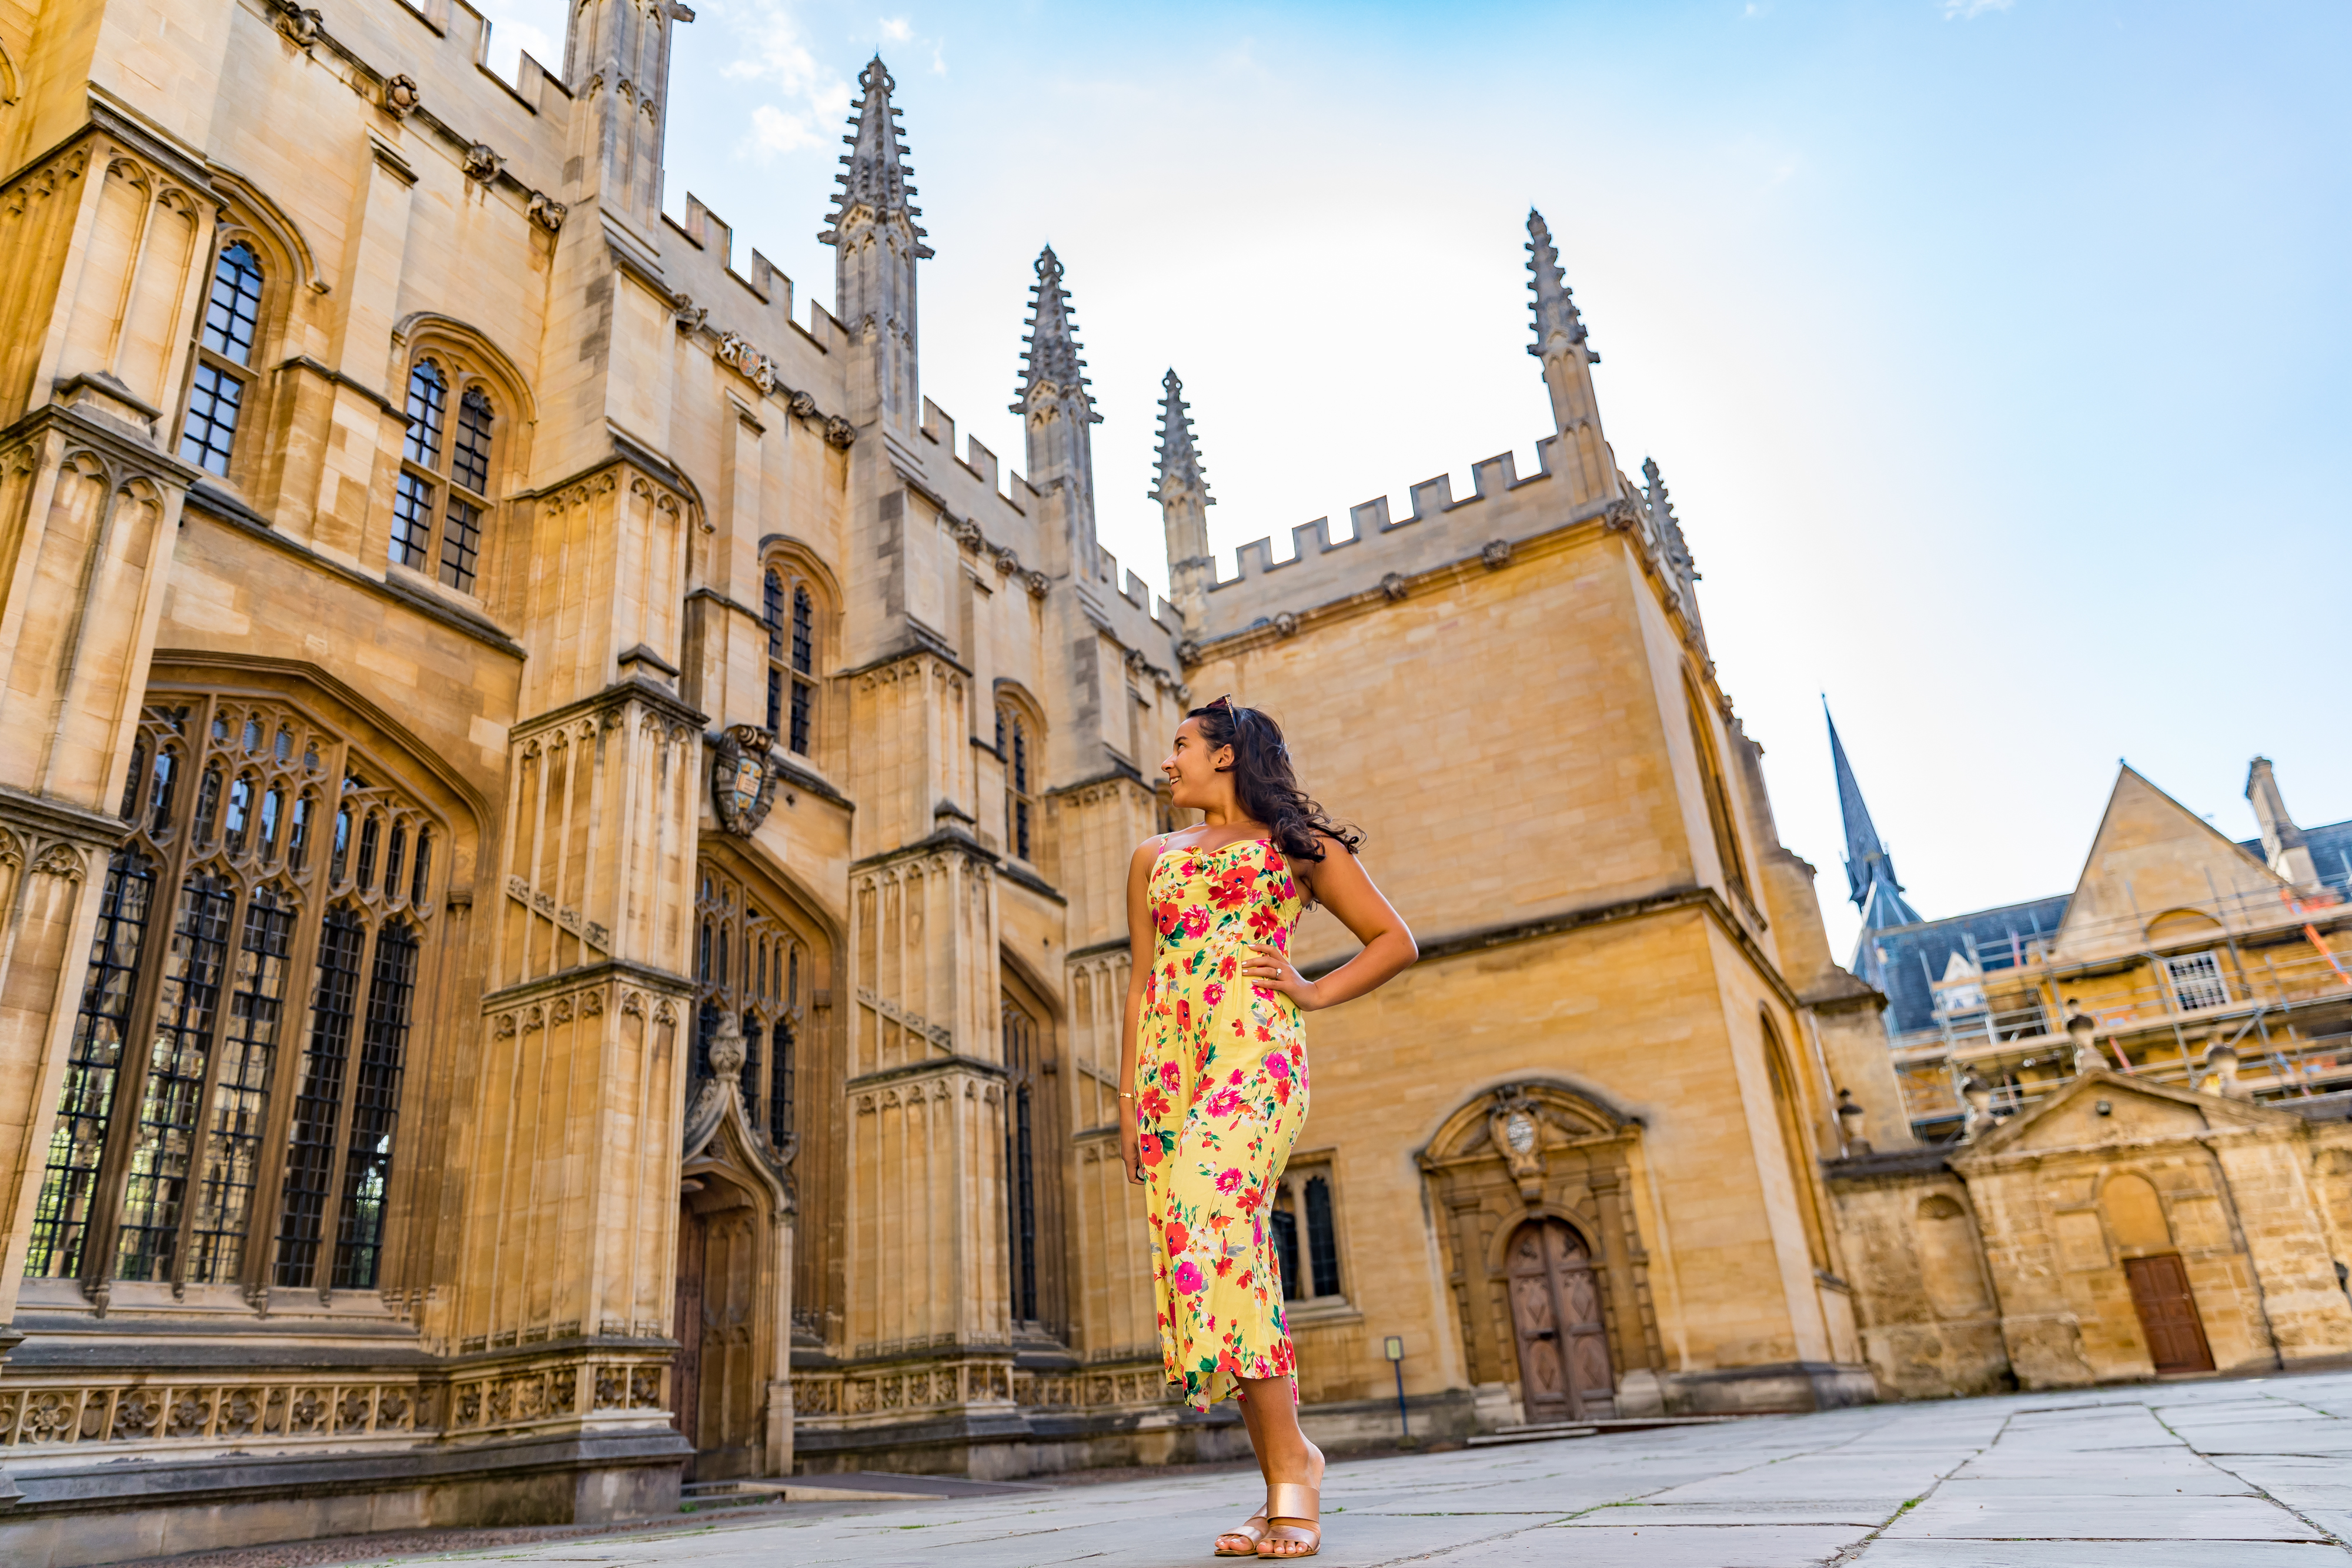 5 Reasons To Visit Oxford